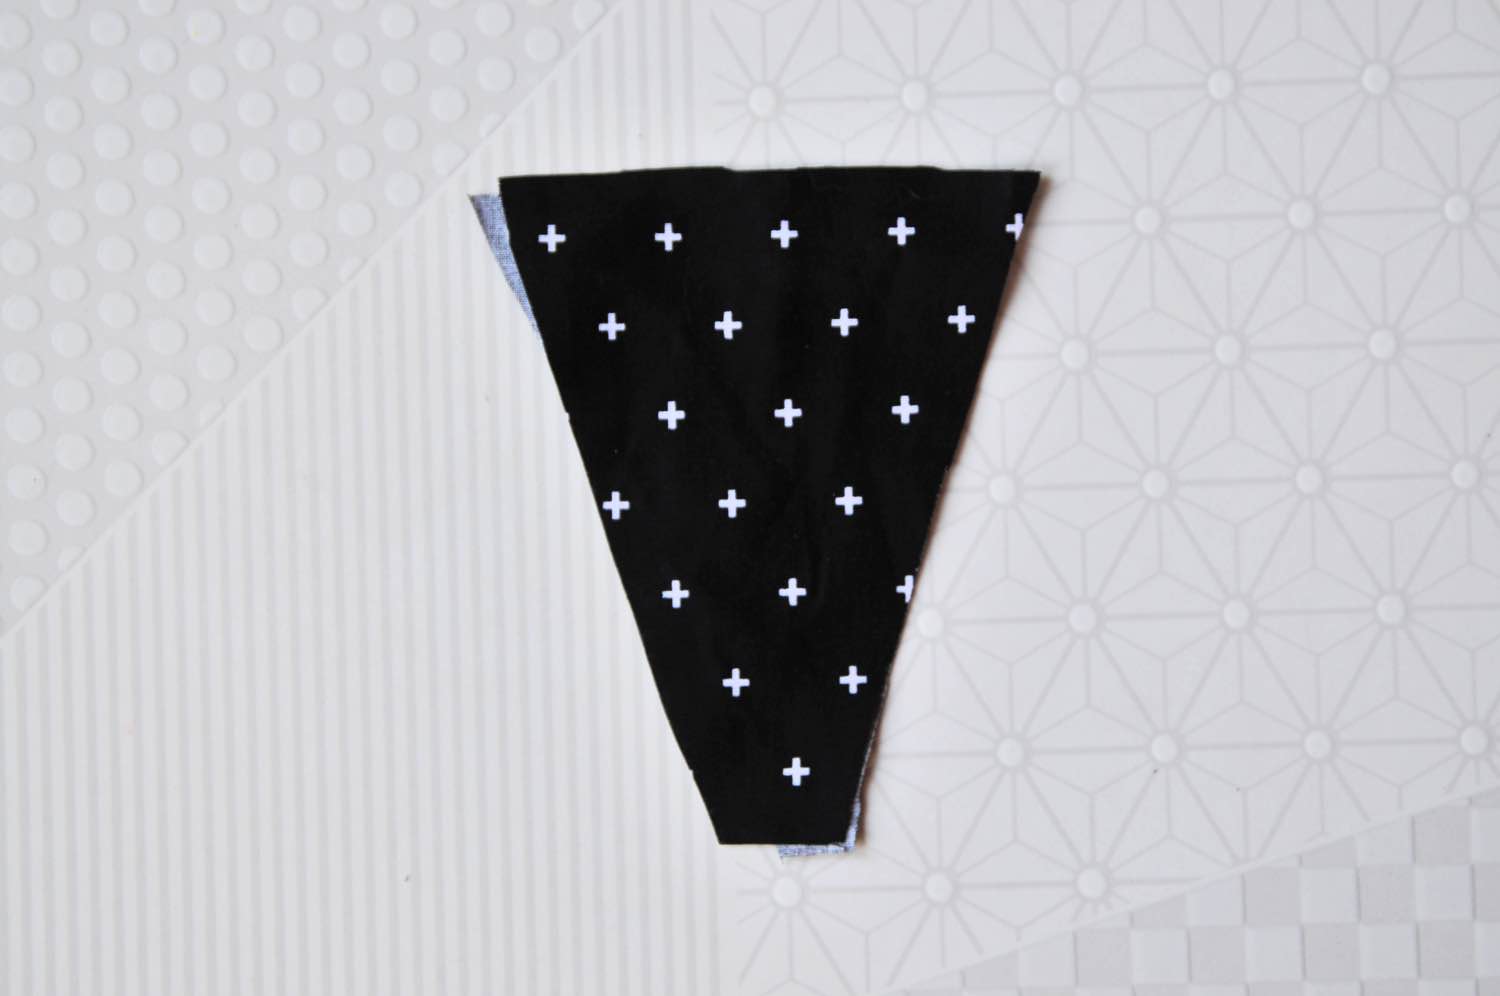 place the triangle fabric lining back to back pop shop america